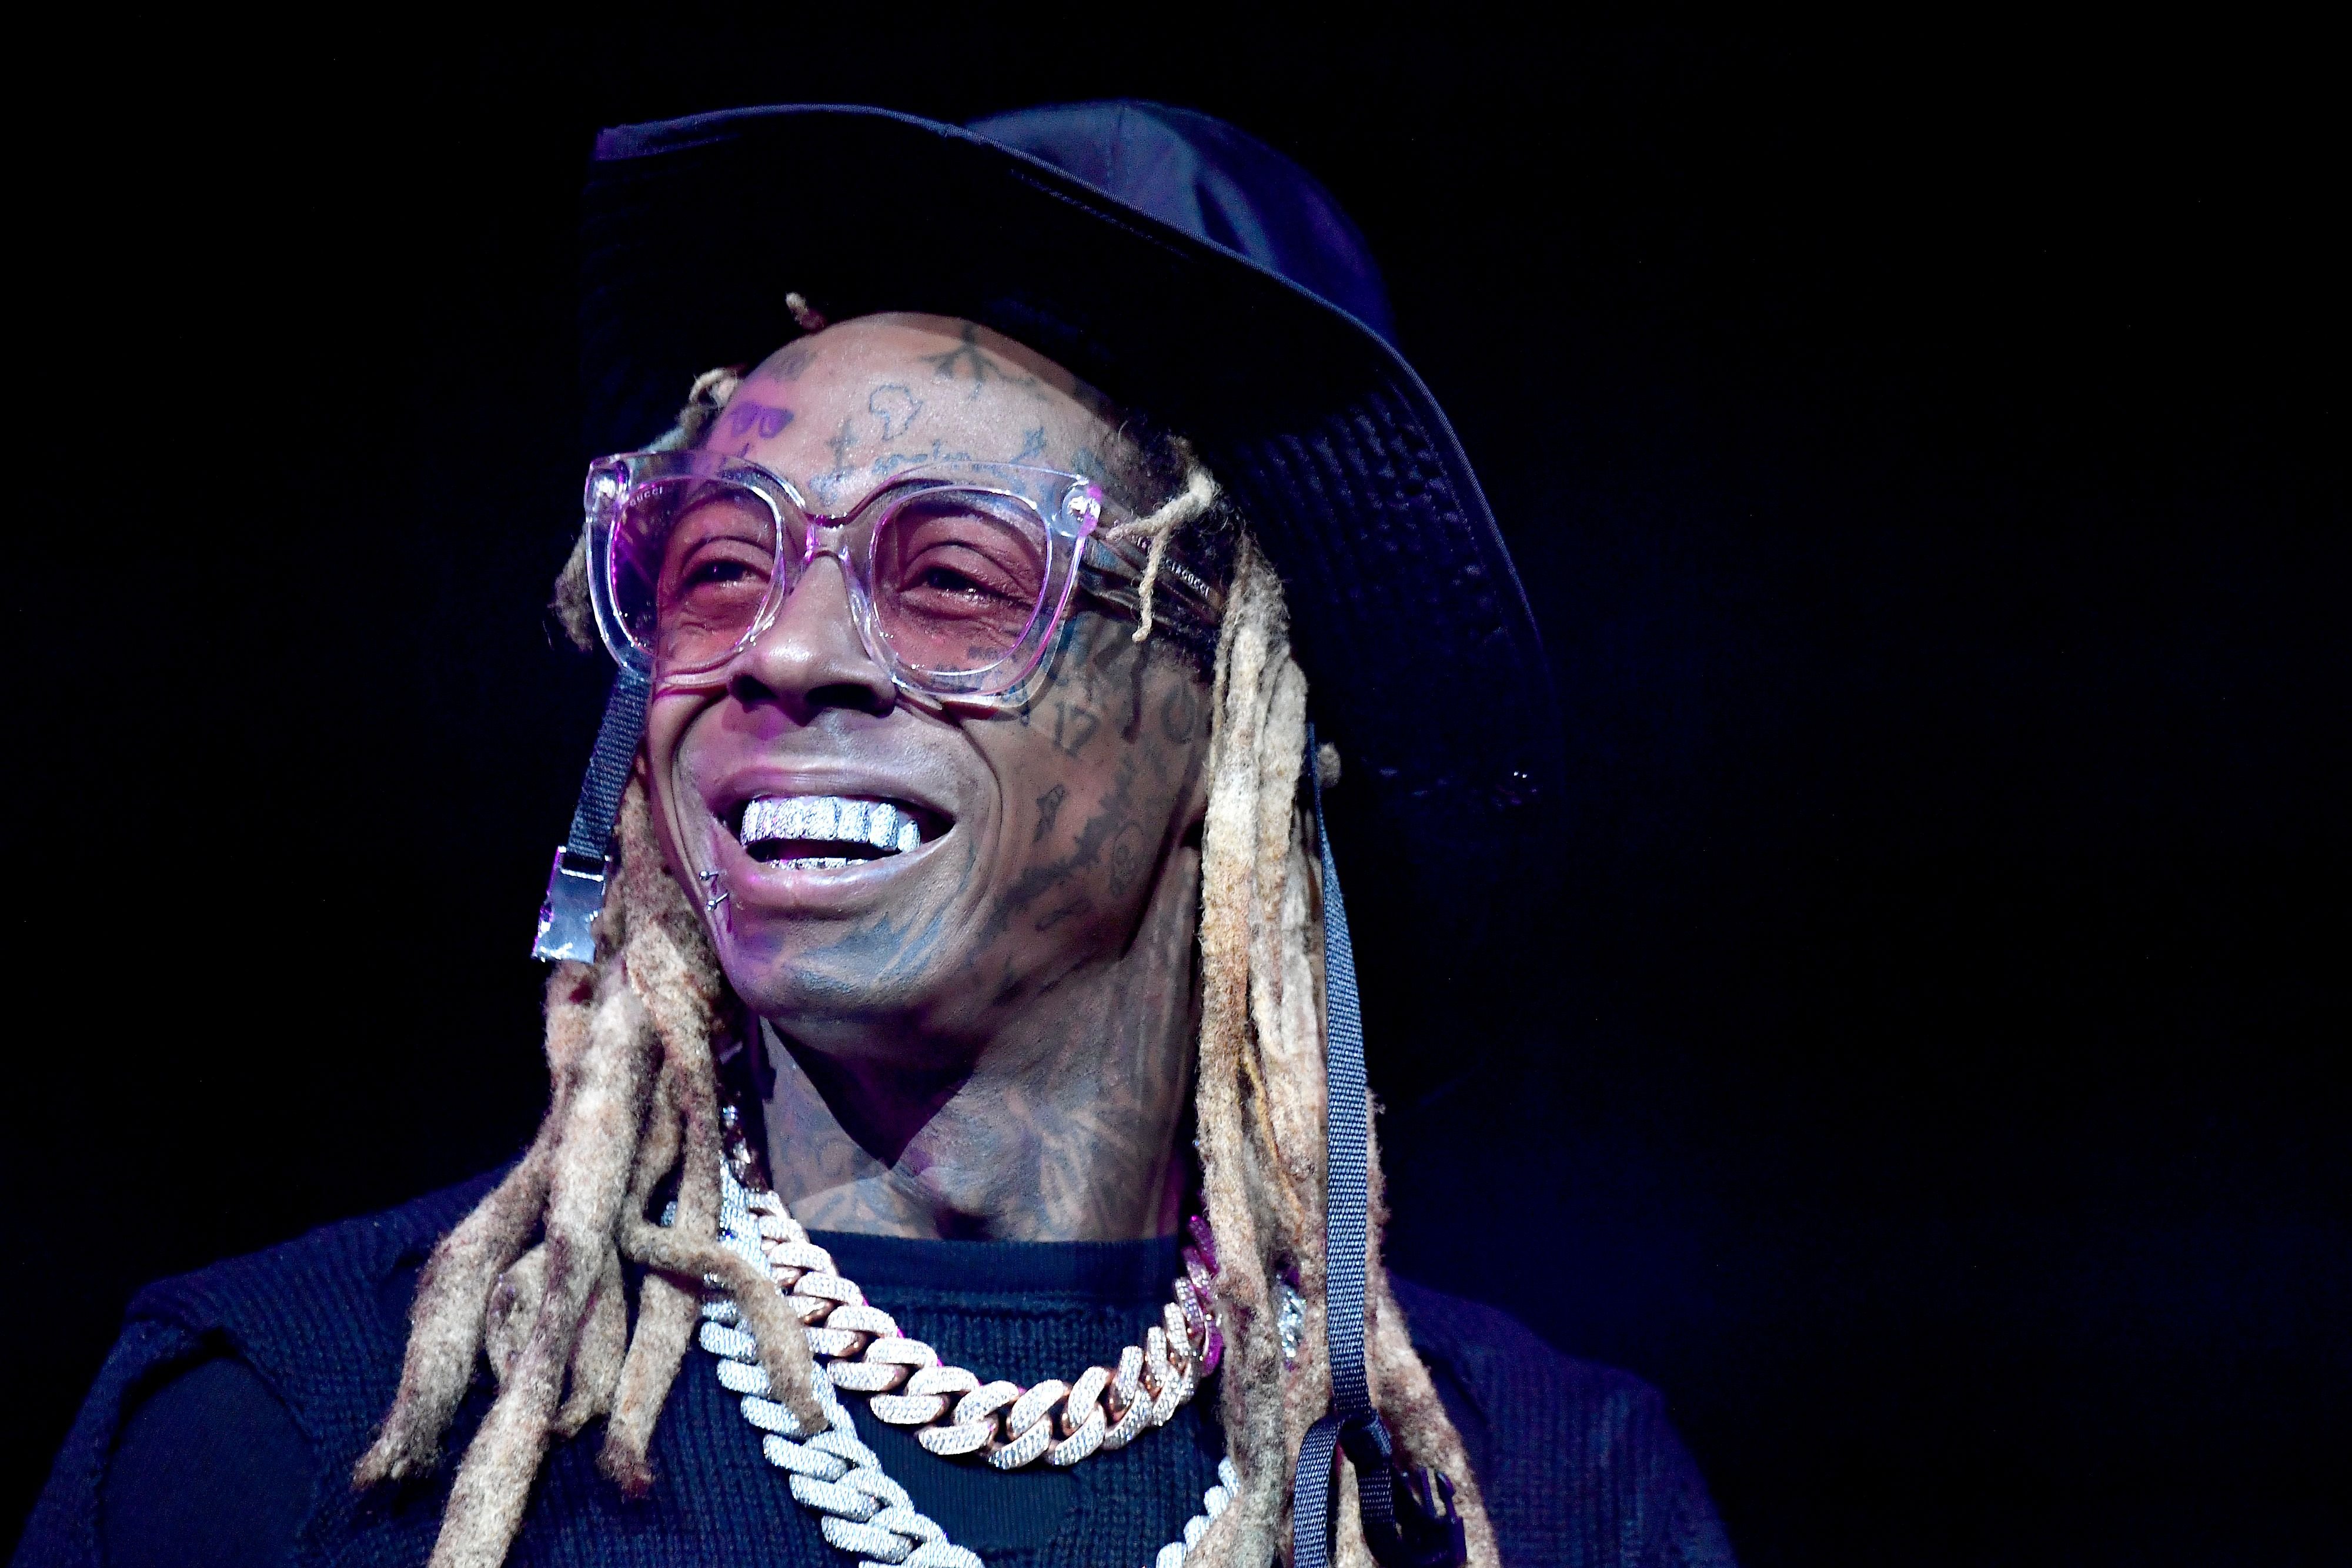 Lil Wayne performs at the Bud Light Super Bowl Music Fest on January 30, 2020 | Photo: Getty Images